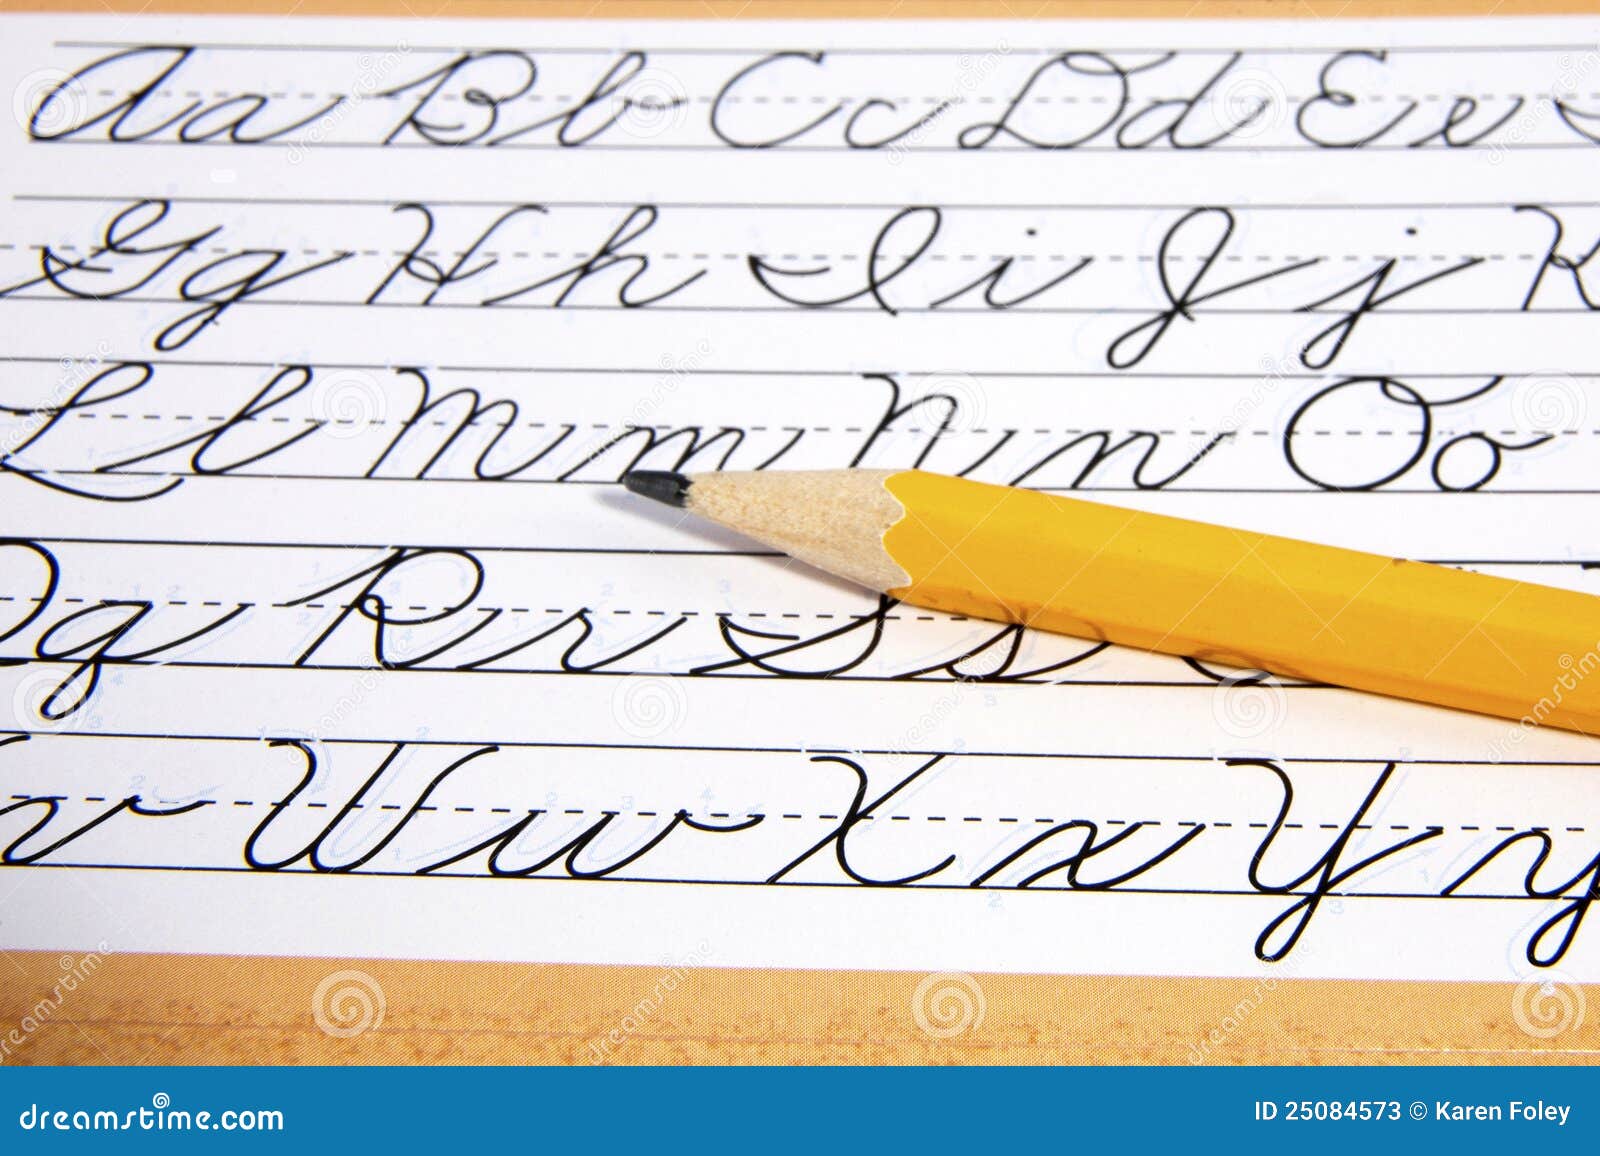 style guide for cursive